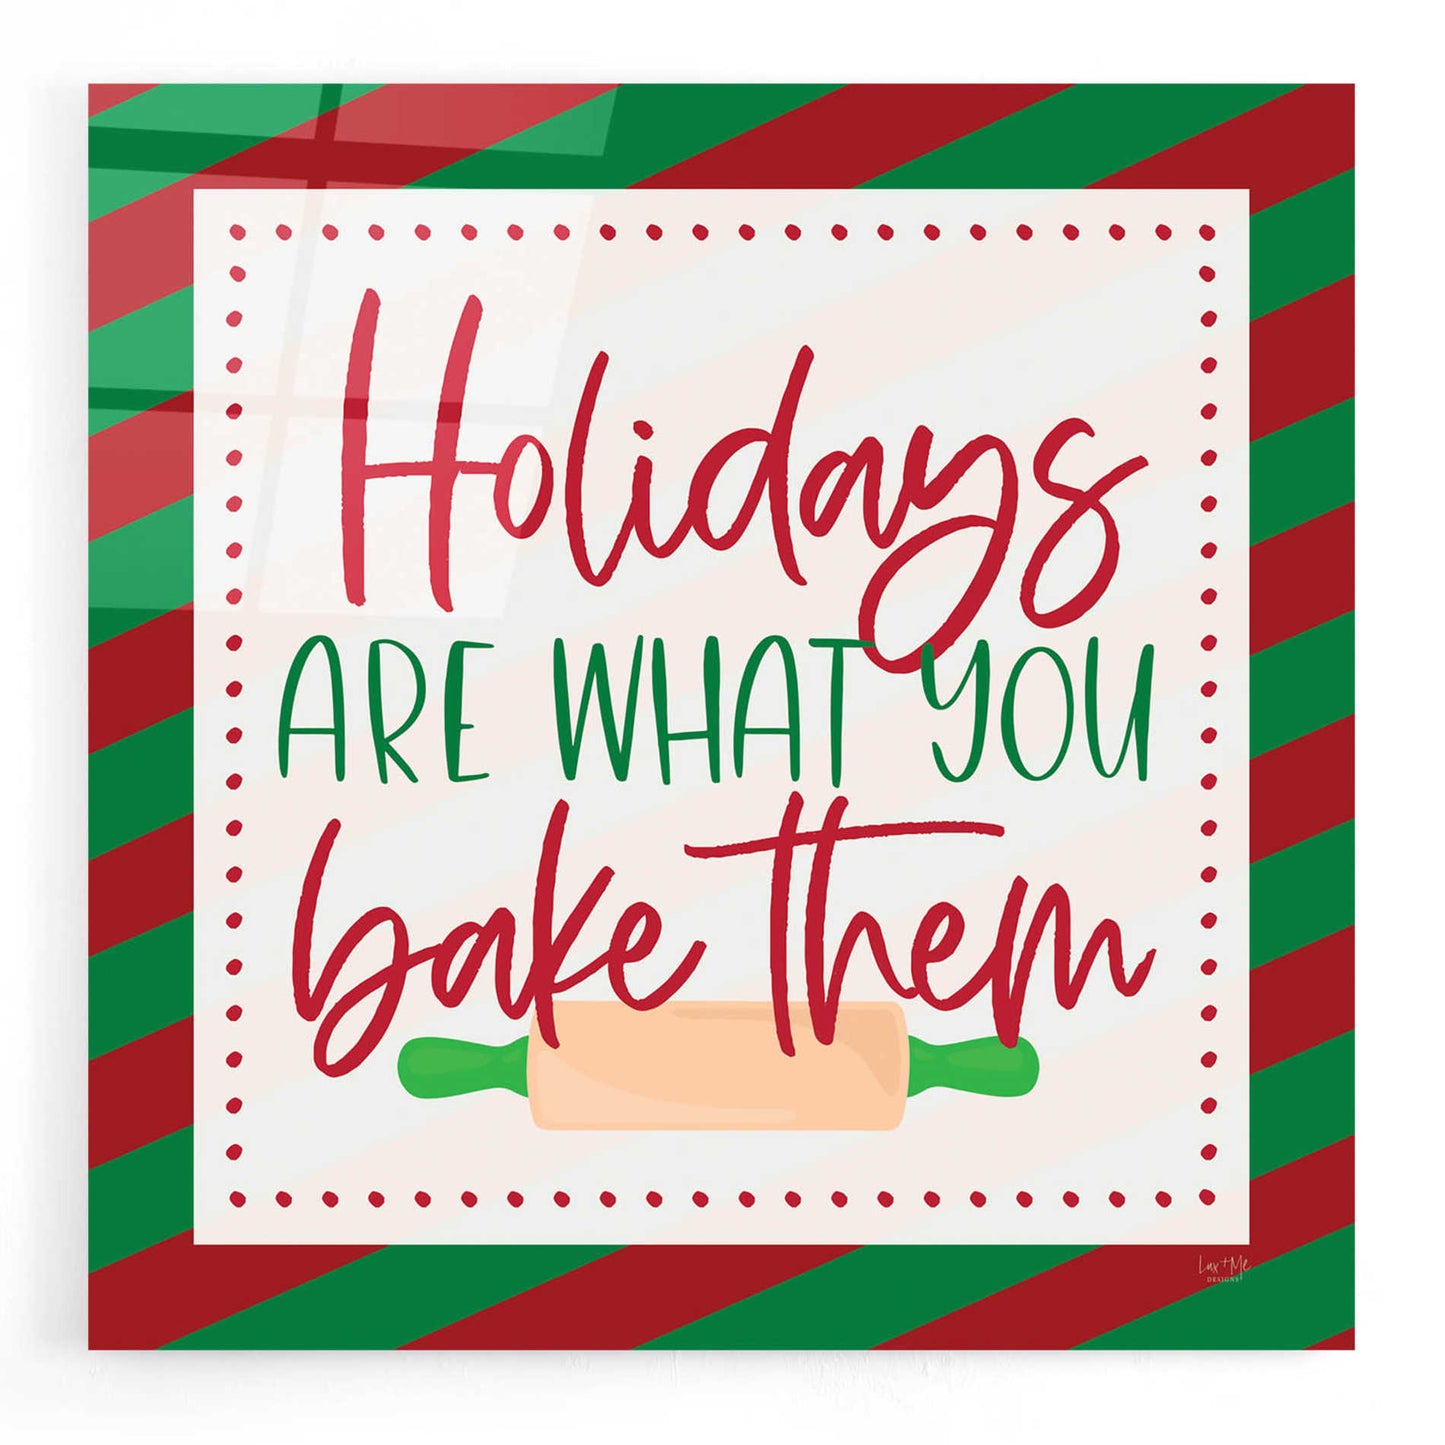 Epic Art 'Holidays are What You Bake Them' by Lux + Me, Acrylic Glass Wall Art,24x24